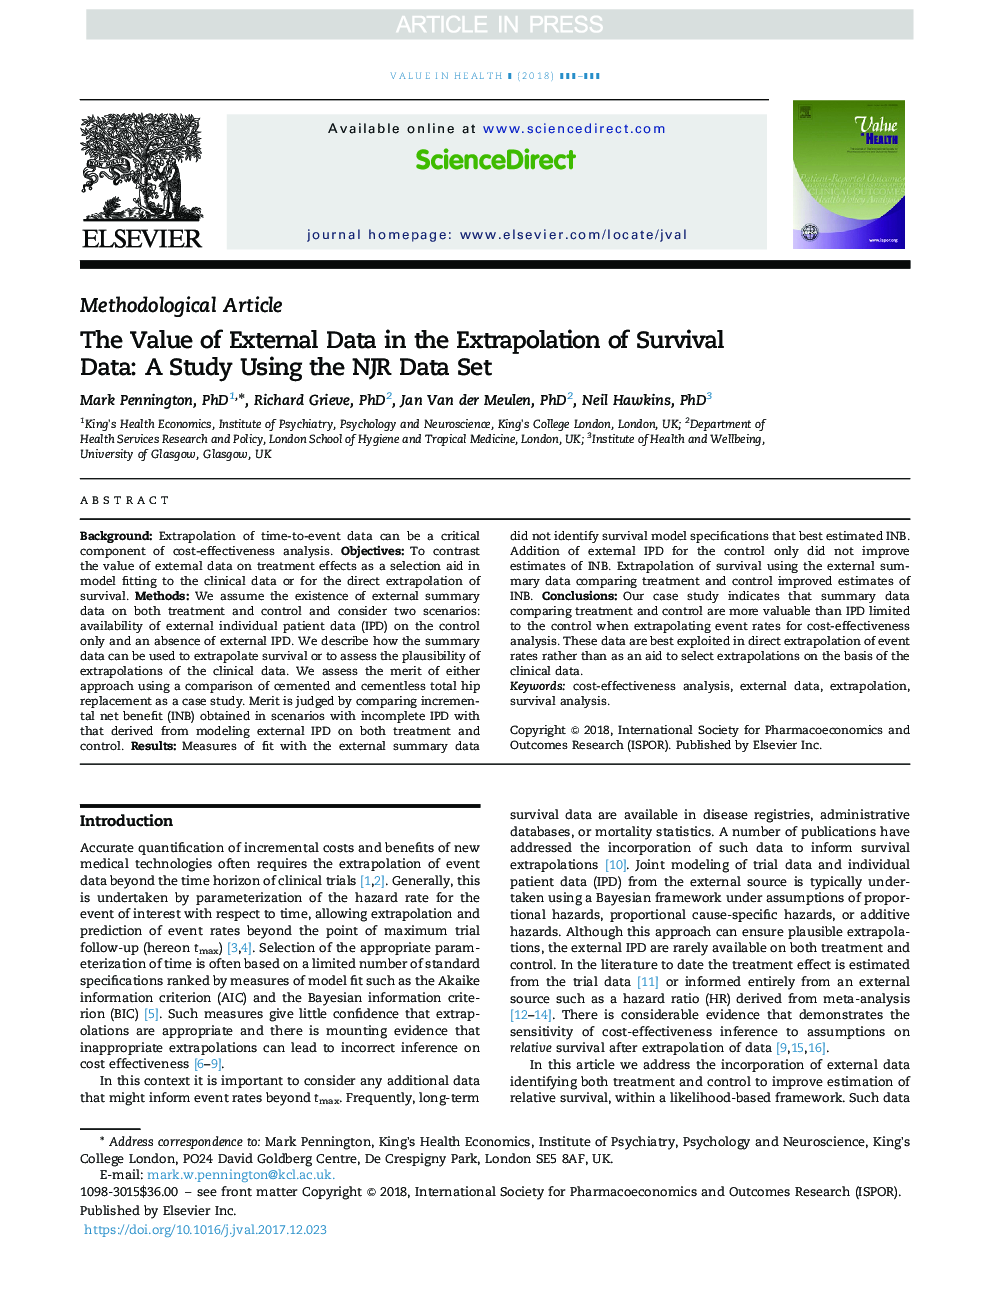 Value of External Data in the Extrapolation of Survival Data: A Study Using the NJR Data Set